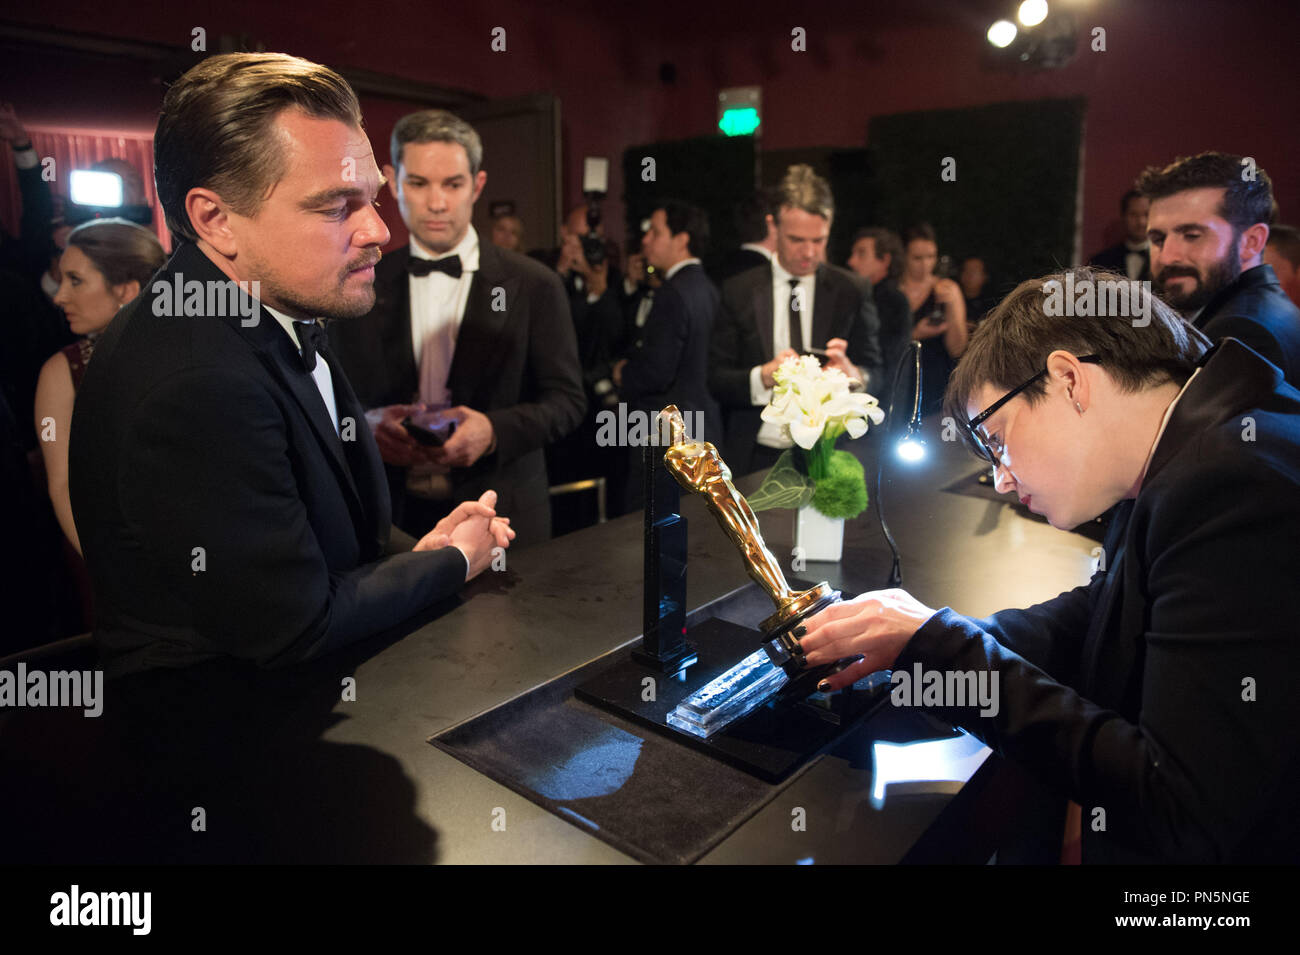 Oscar®-winner, Leonardo DiCaprio, at the Governors Ball following the live ABC Telecast of The 88th Oscars® at the Dolby® Theatre in Hollywood, CA on Sunday, February 28, 2016.  File Reference # 32854 840THA  For Editorial Use Only -  All Rights Reserved Stock Photo